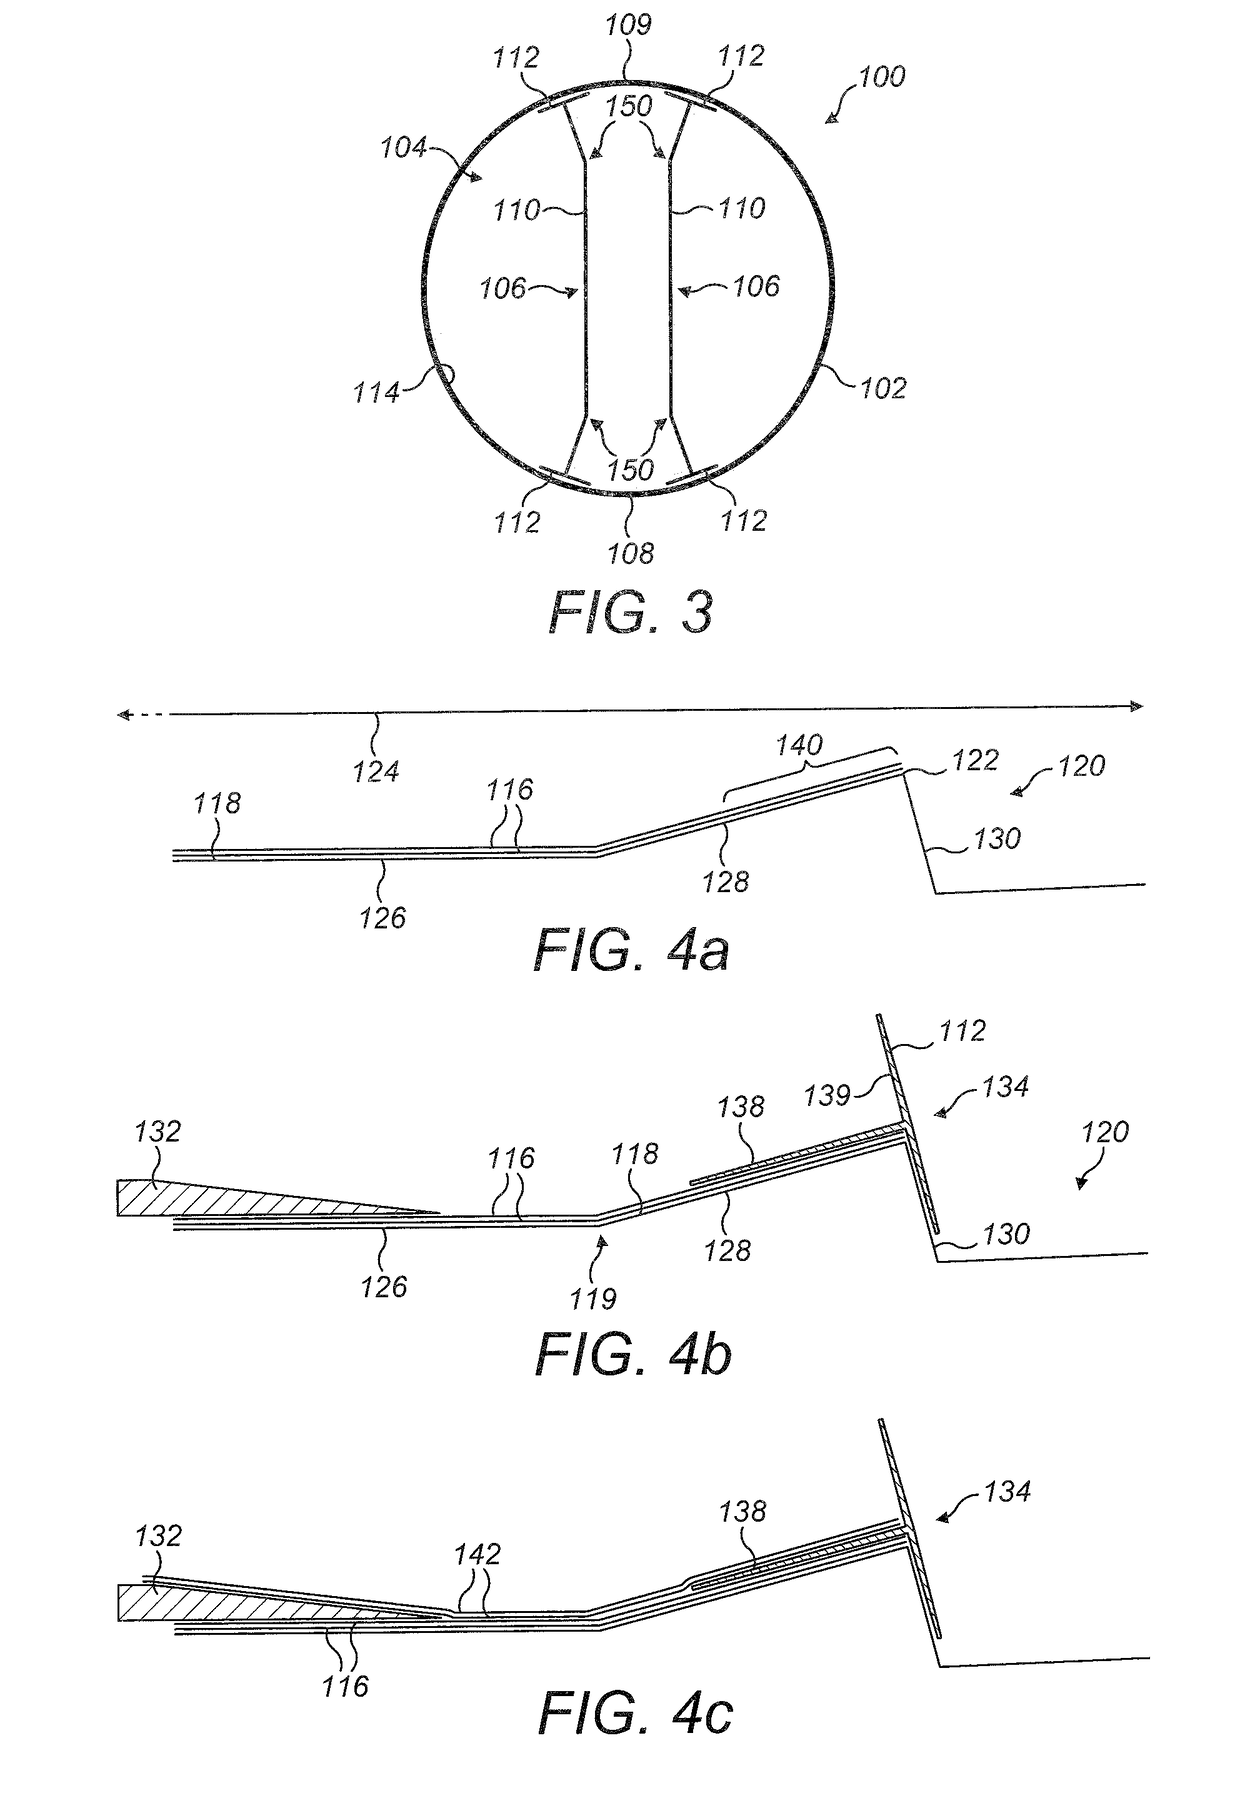 Reinforcing structure for a wind turbine blade